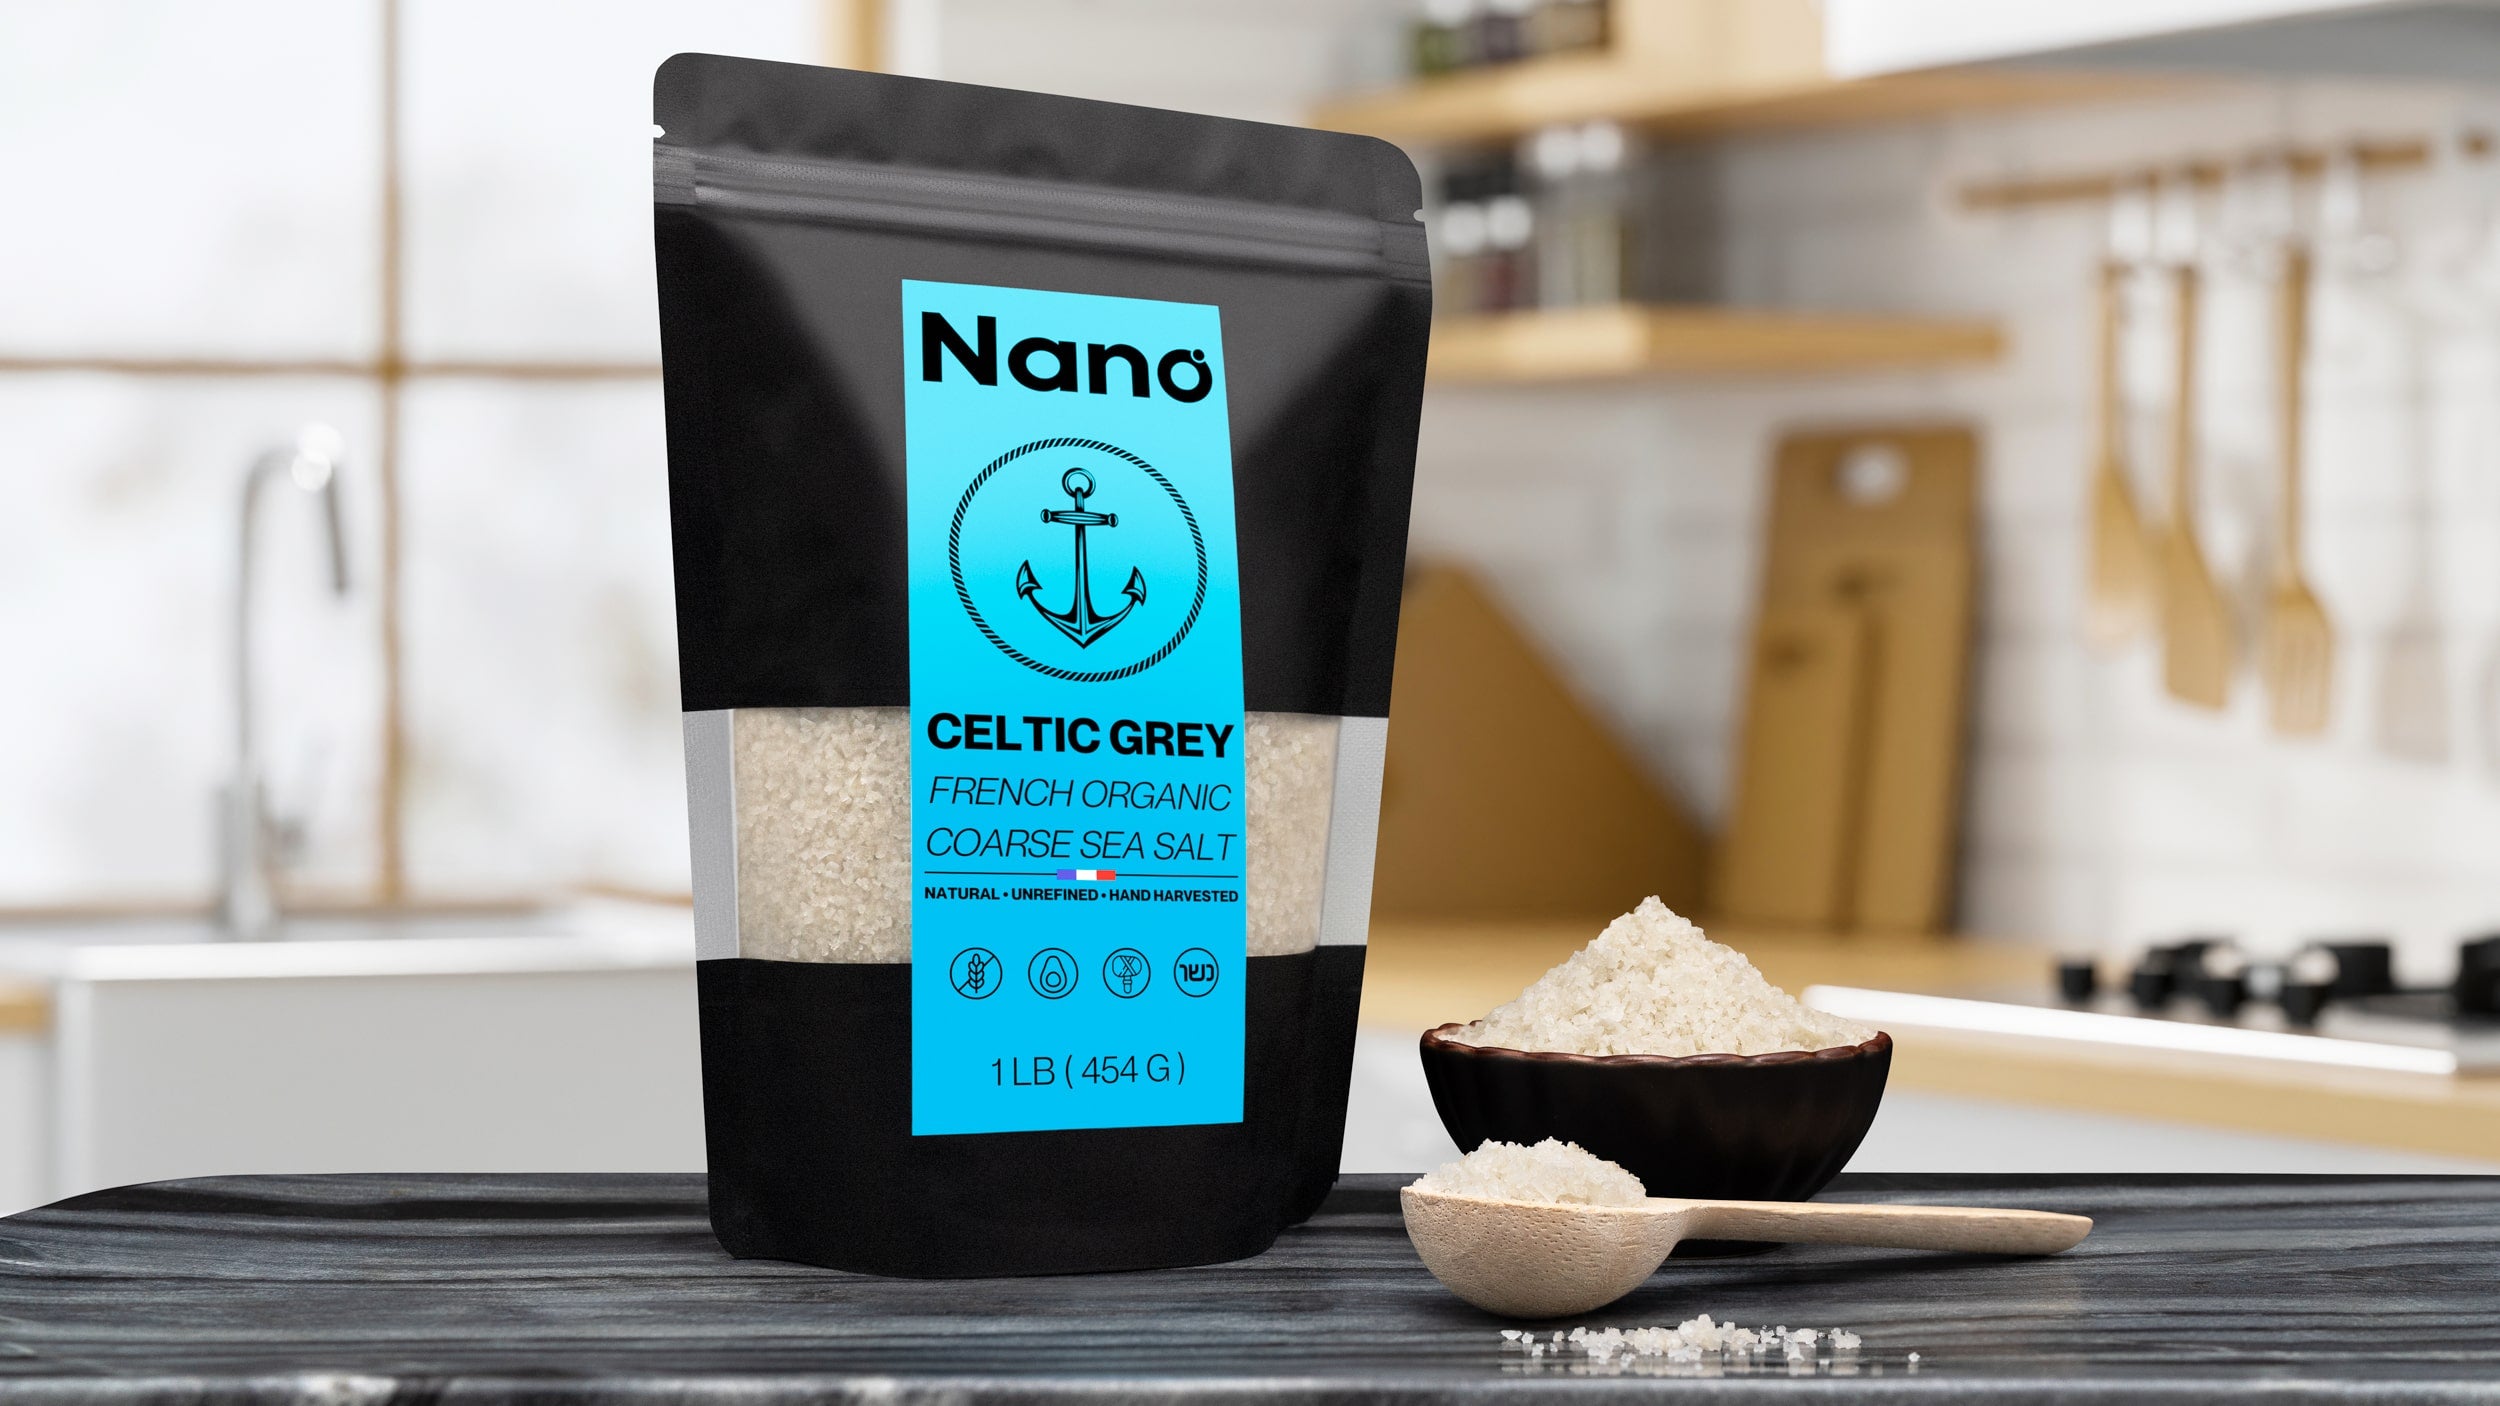 1 LB bag of Nano Celtic Grey French Organic Coarse Sea Salt sitting on a marble countertop in a bright modern kitchen